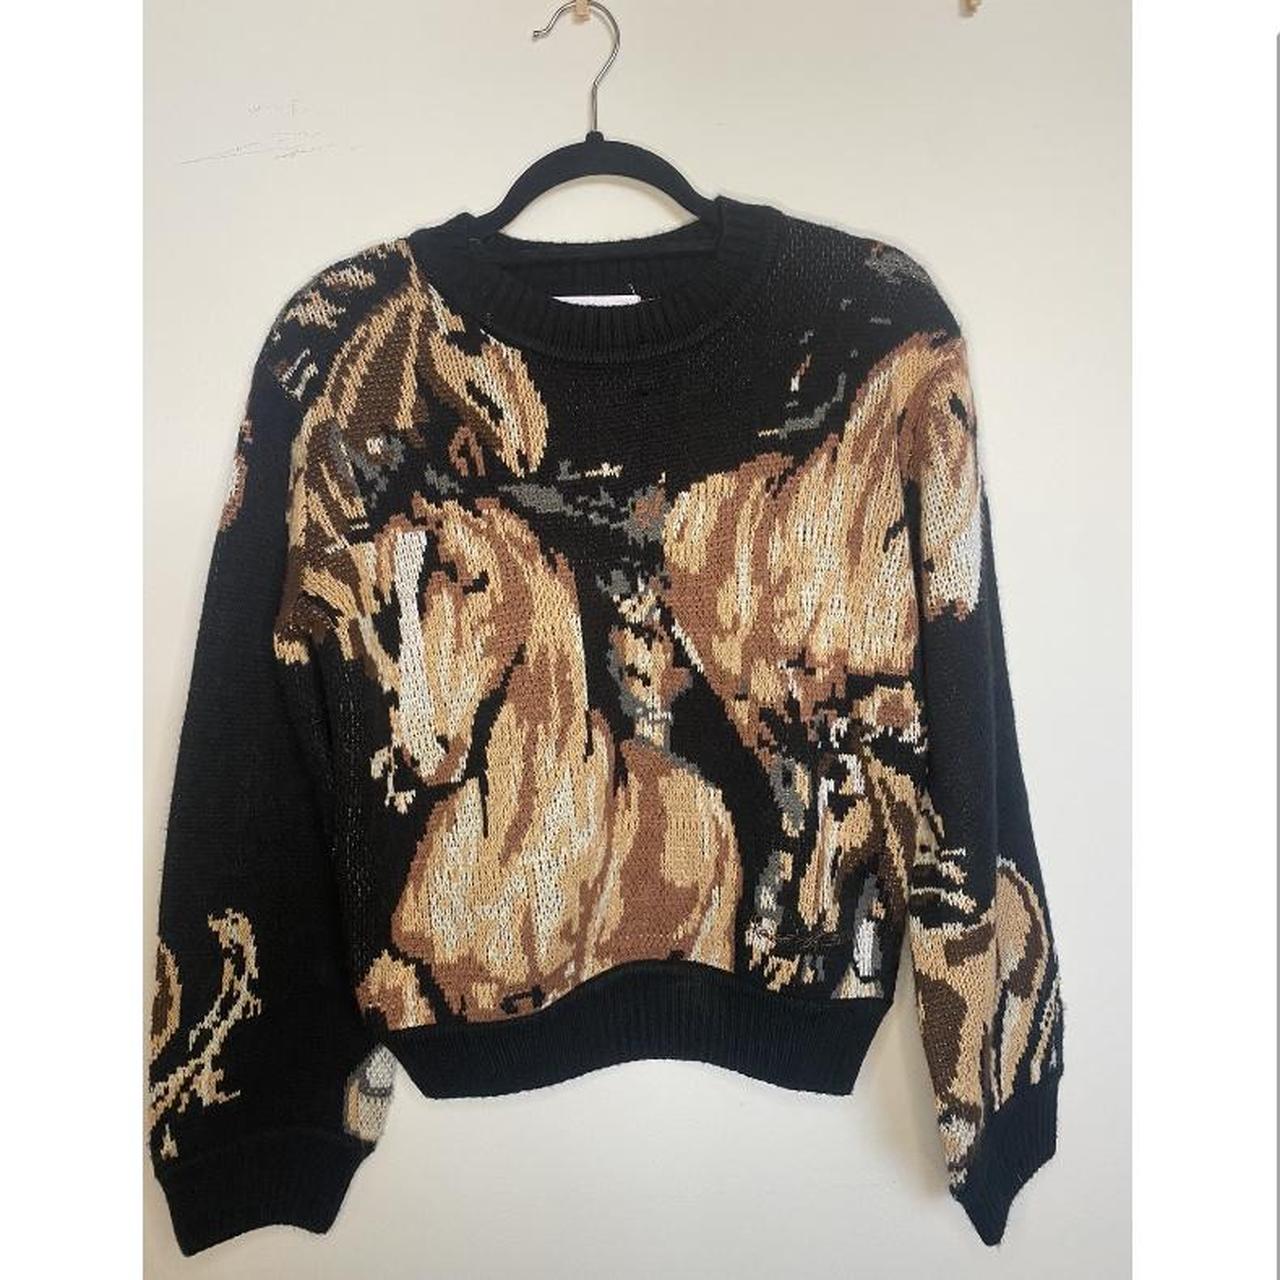 House of Sunny Women's Black and Brown Jumper | Depop